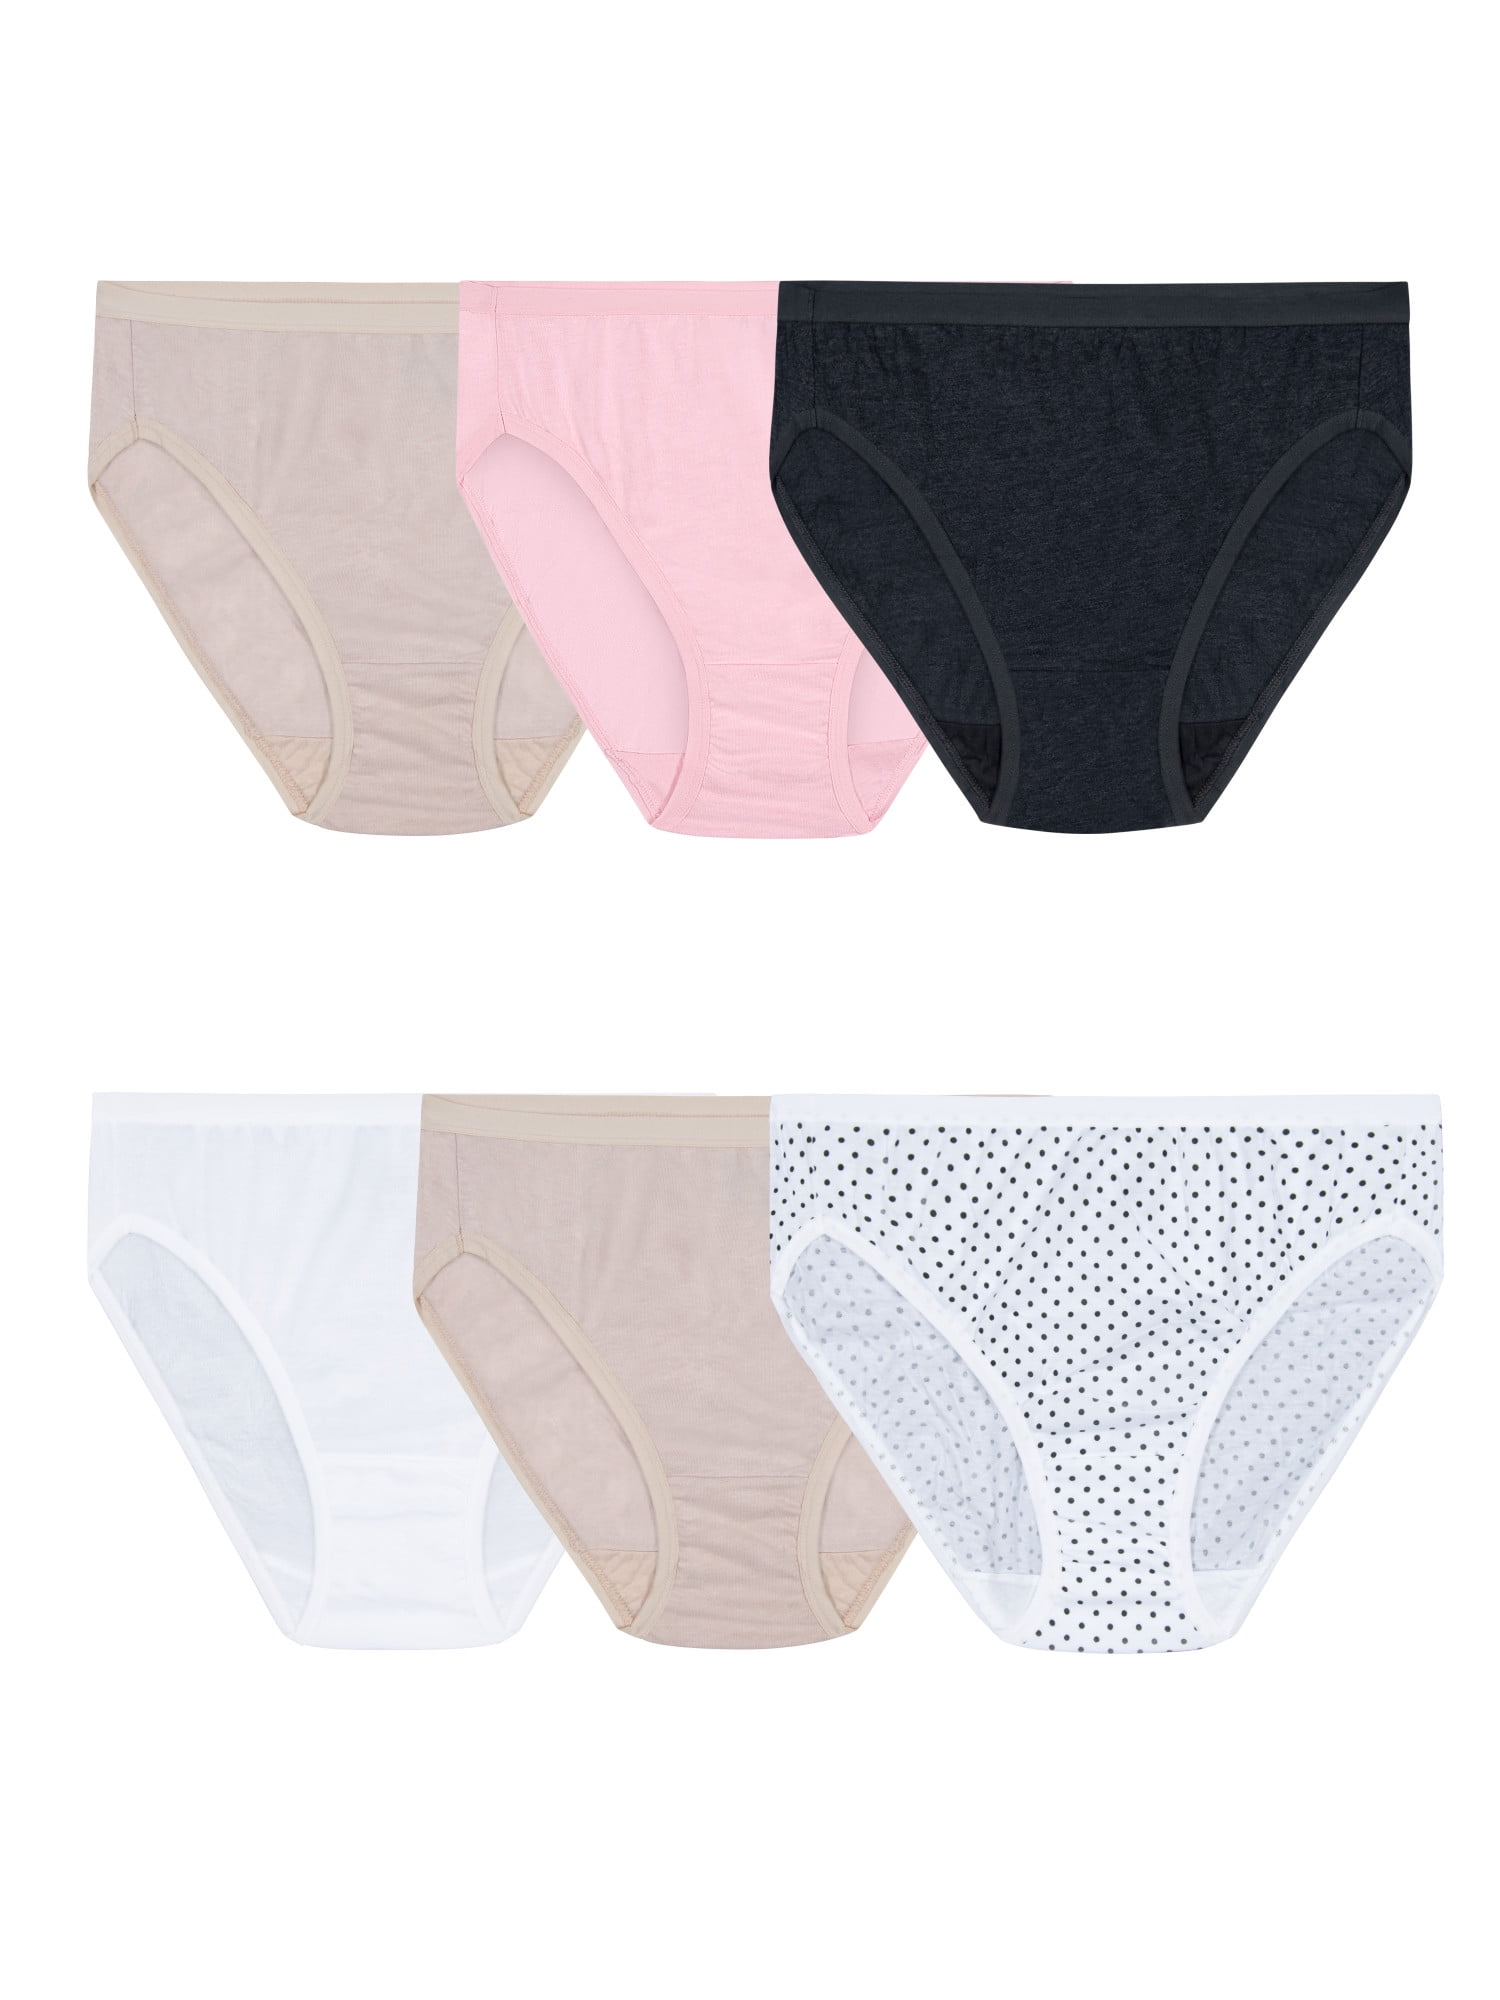 Fruit of the Loom Women's Premium Ultra Soft Hipster Panty, 6 Pack, Sizes  5-9 